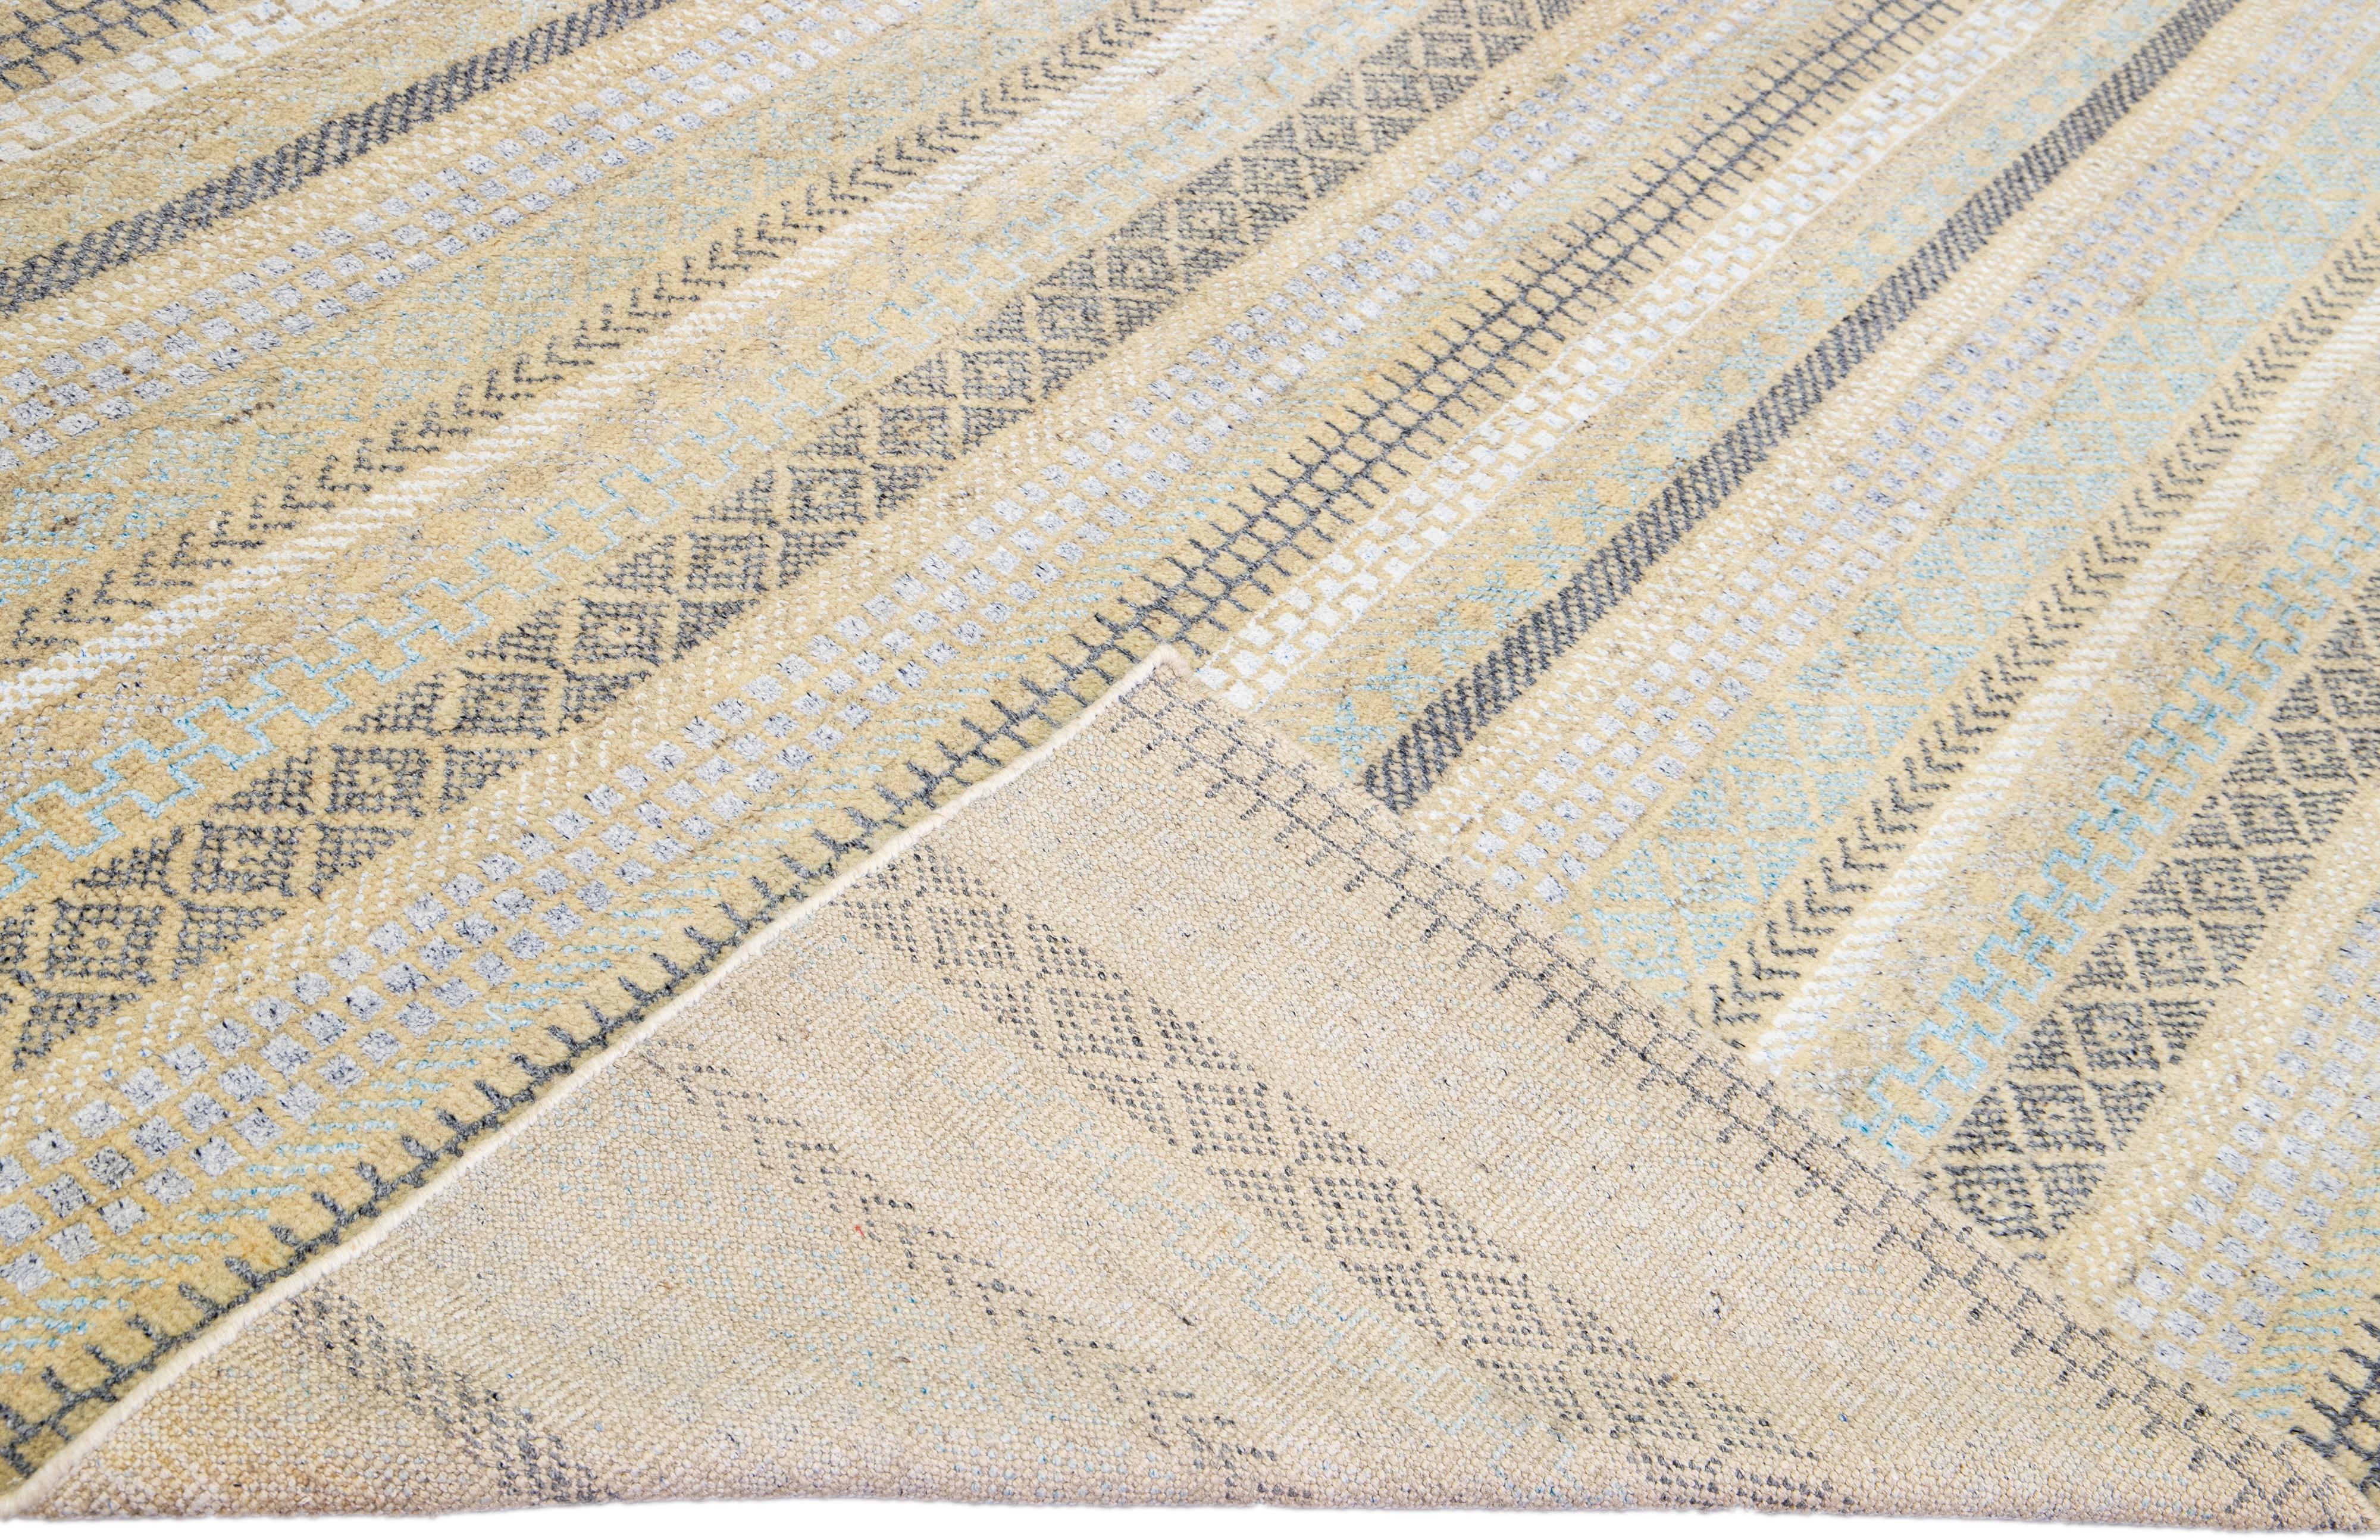 Beautiful modern Apadana's Safi Collection hand-knotted wool rug with a beige color field. This Modern rug has blue, ivory, and gray accents in a gorgeous all-over geometric design.

This rug measures: 9'9